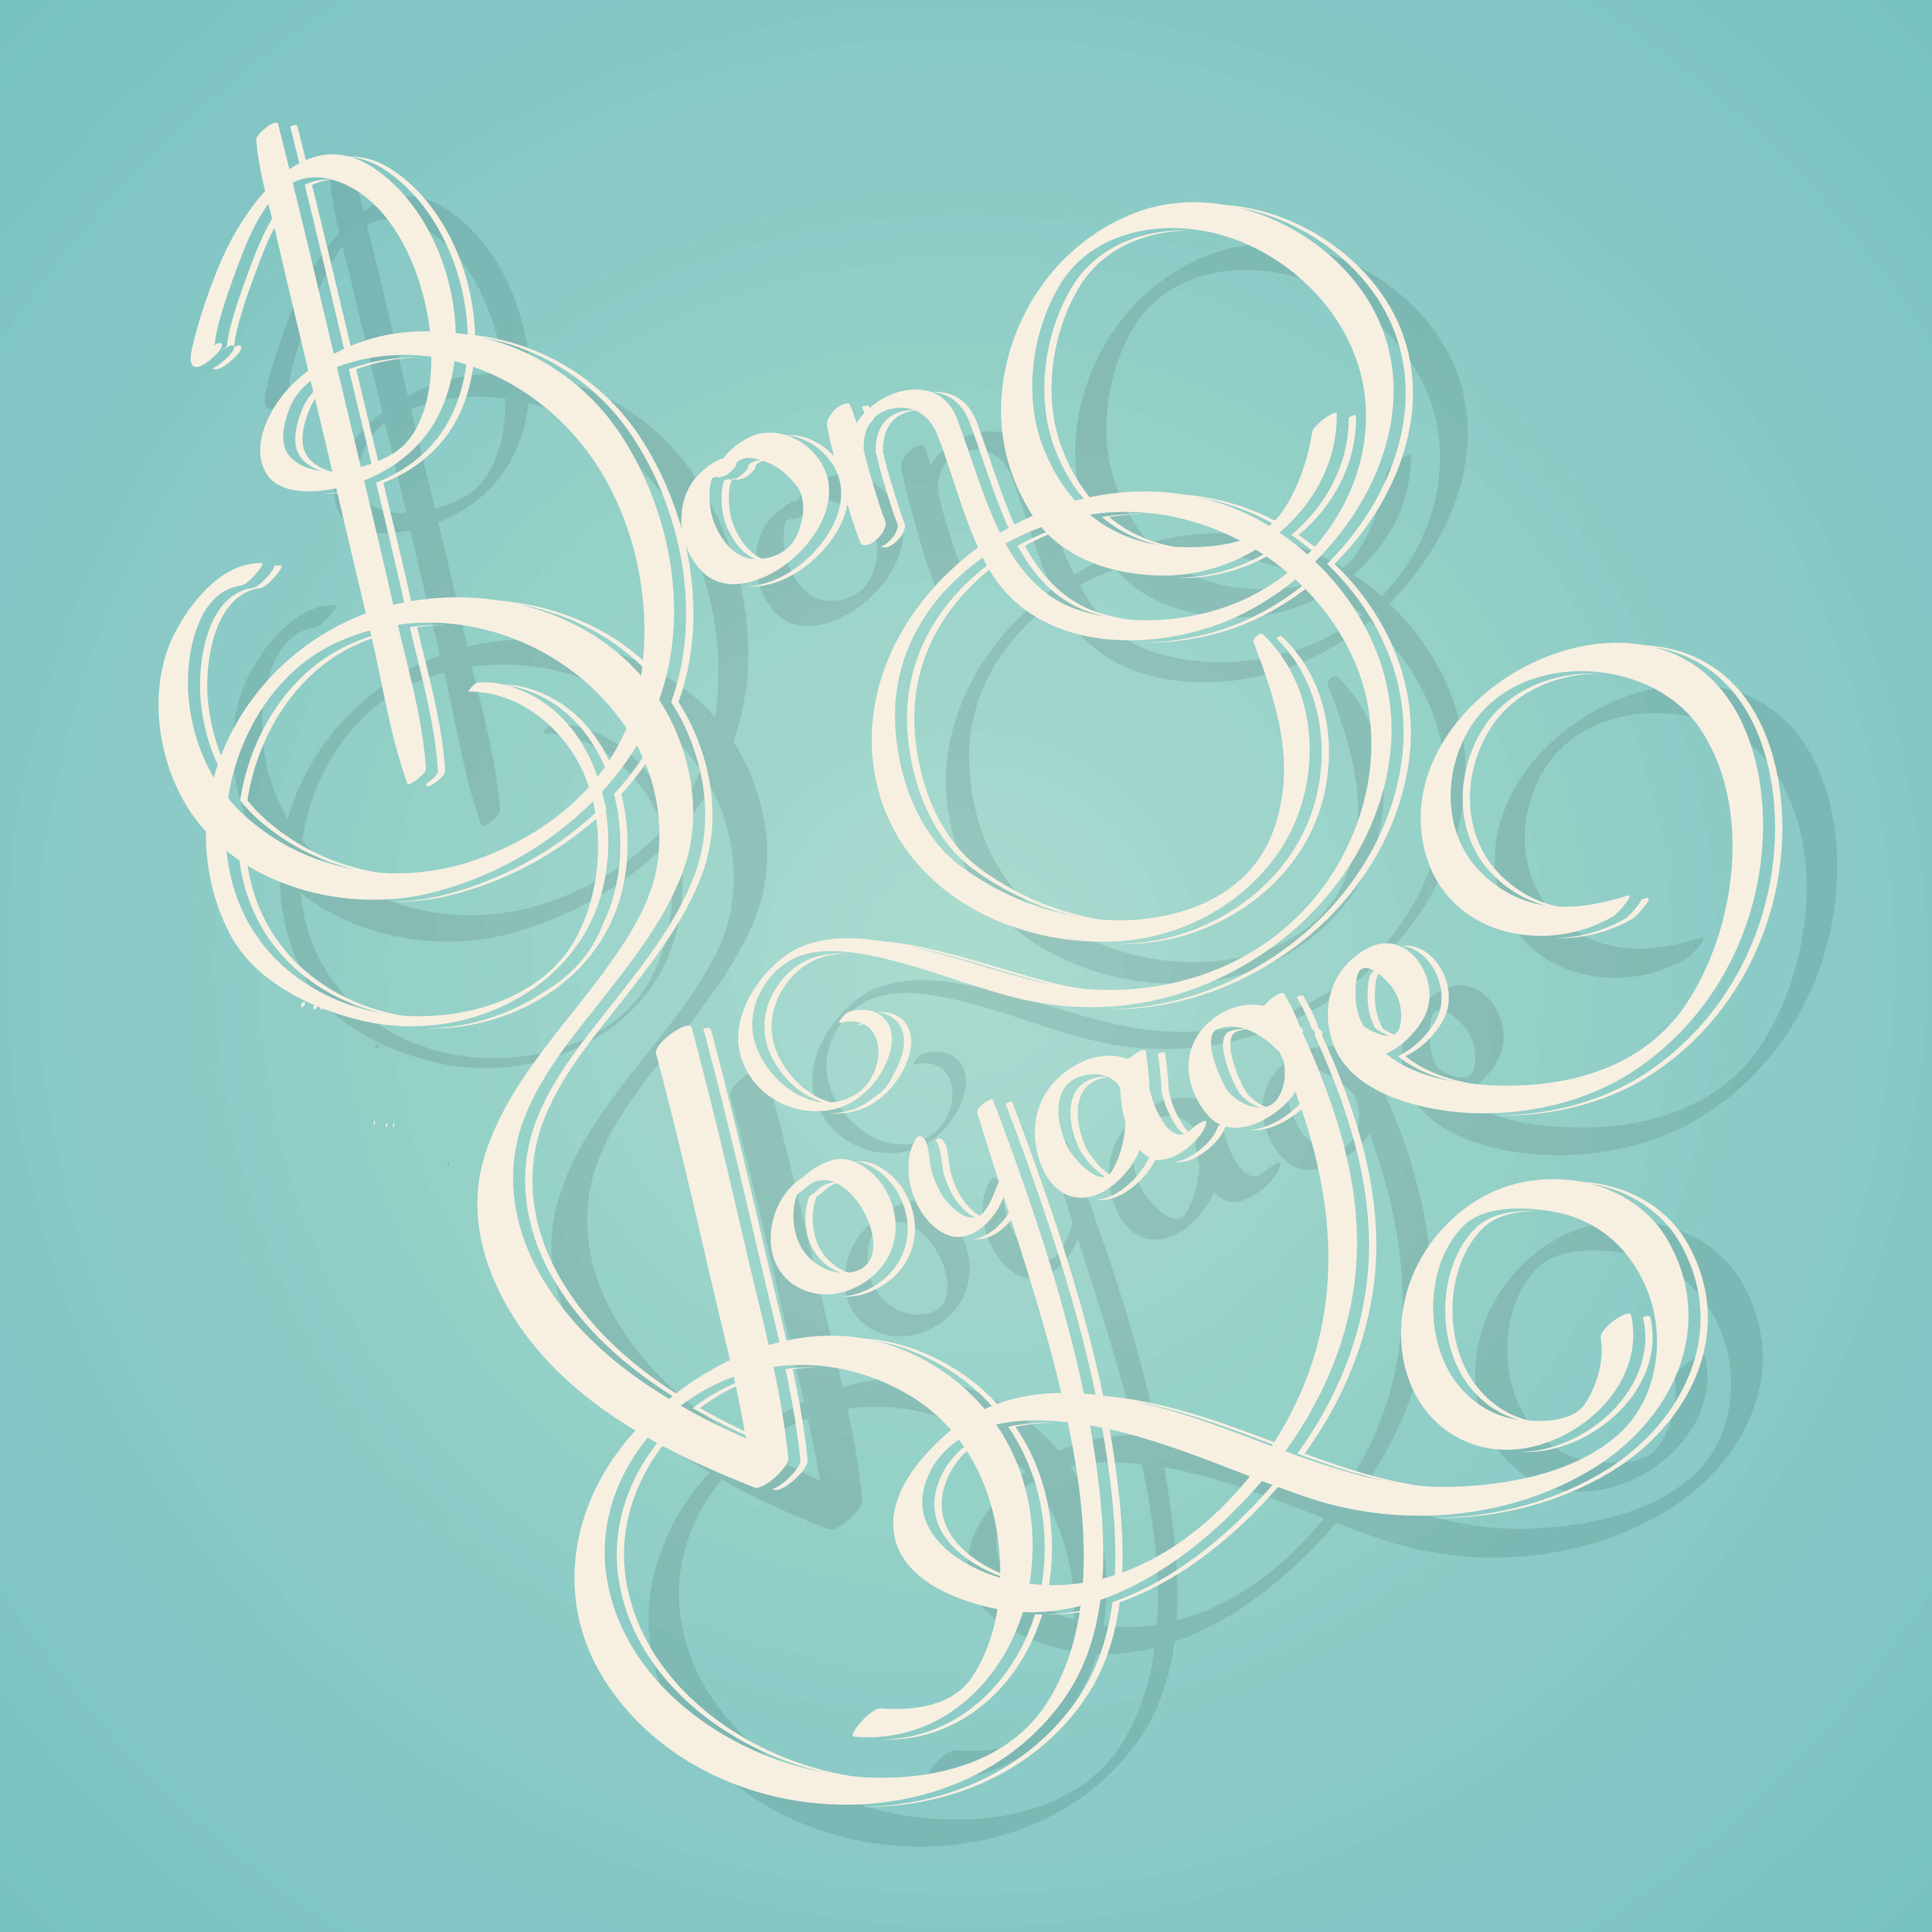 Calligraphy Bon Voyage Text – Download Free Vectors, Clipart In Bon Voyage Card Template